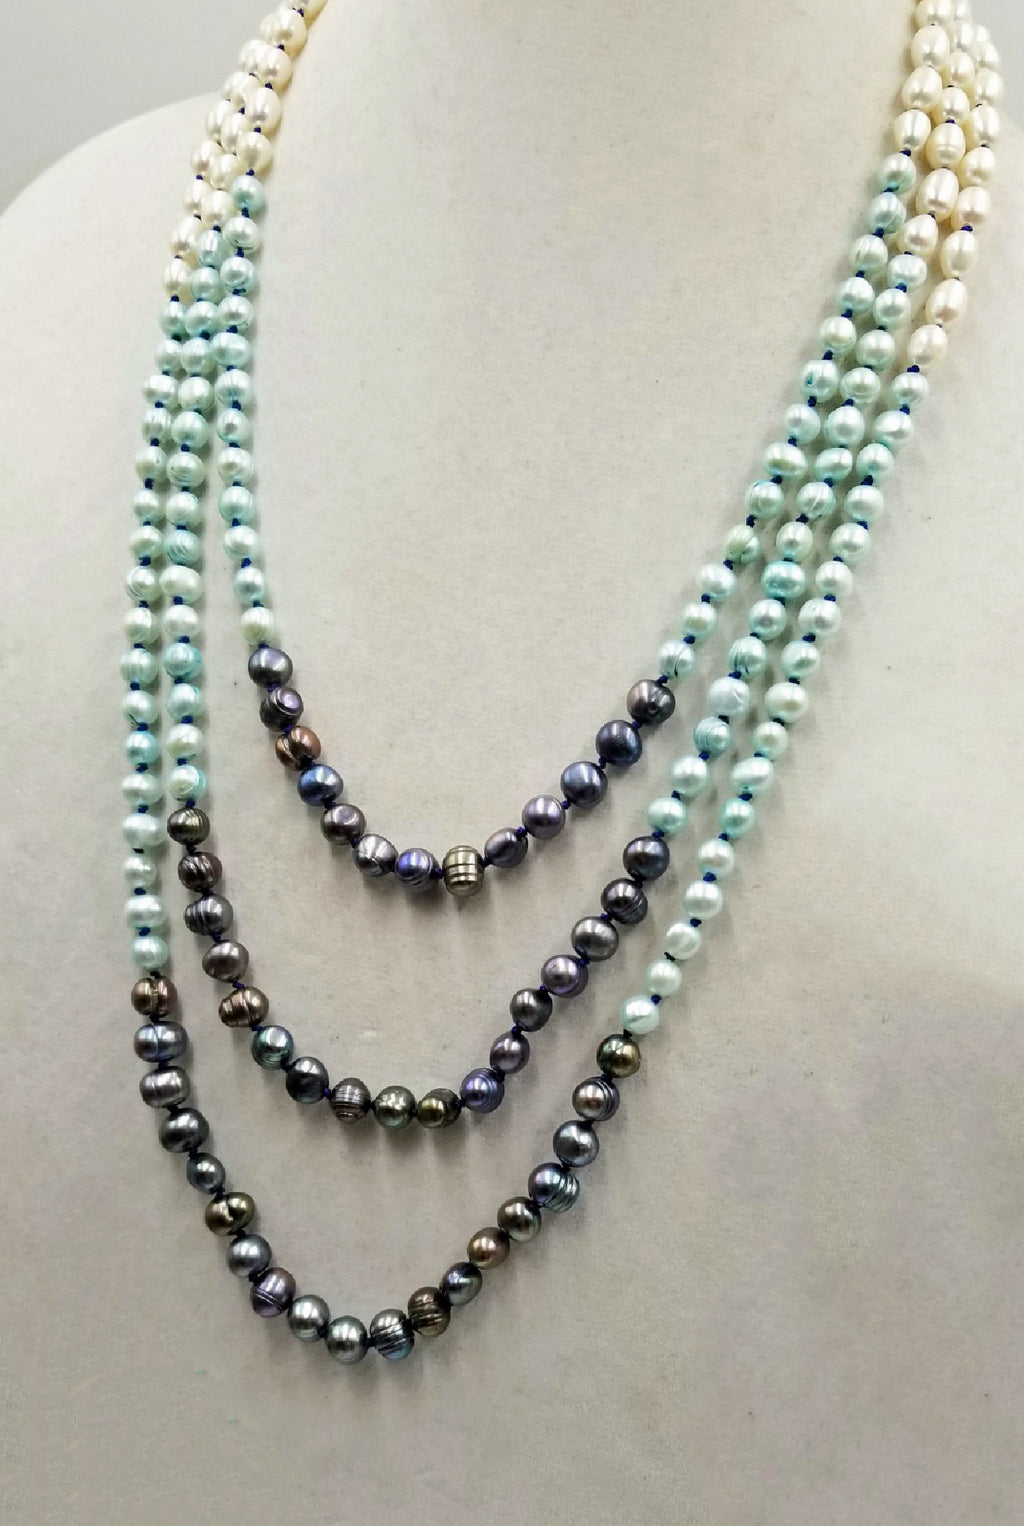 Classic or modern? New to our Aurora Borealis Collection. The black pearls are a knock-out, enhancing the white pearls.  22" shortest strand.